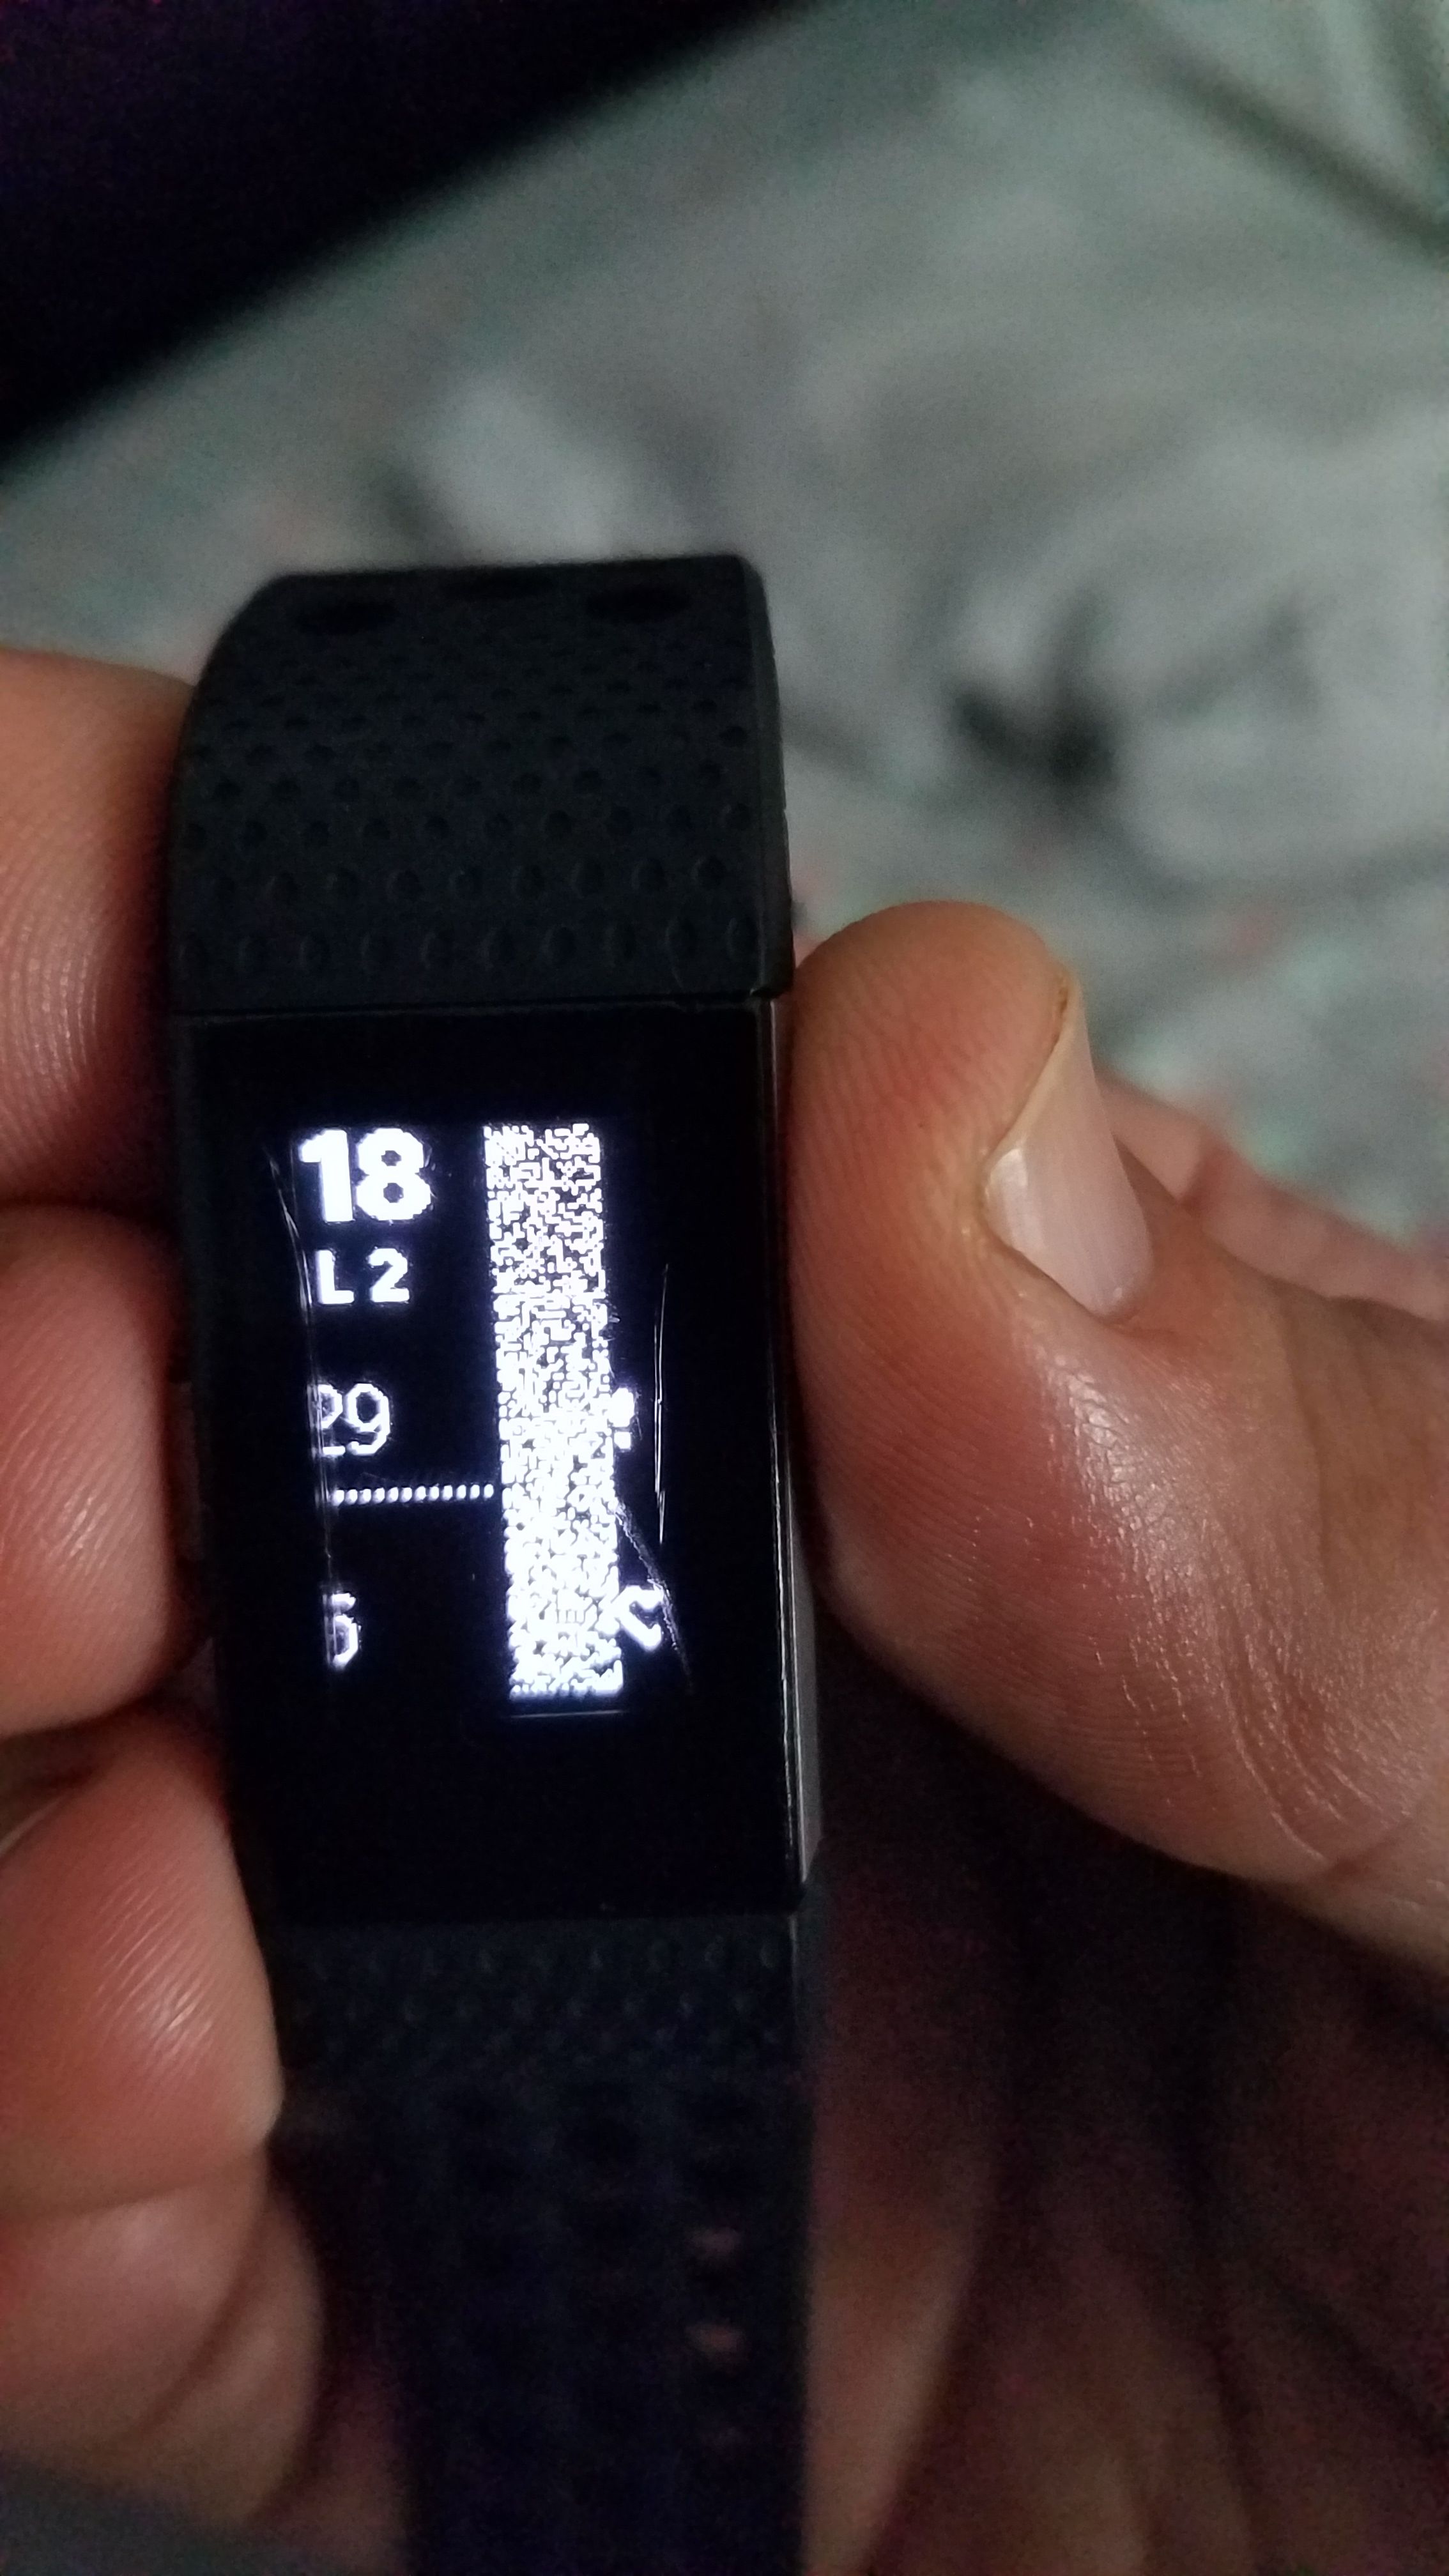 fitbit charge 2 no display